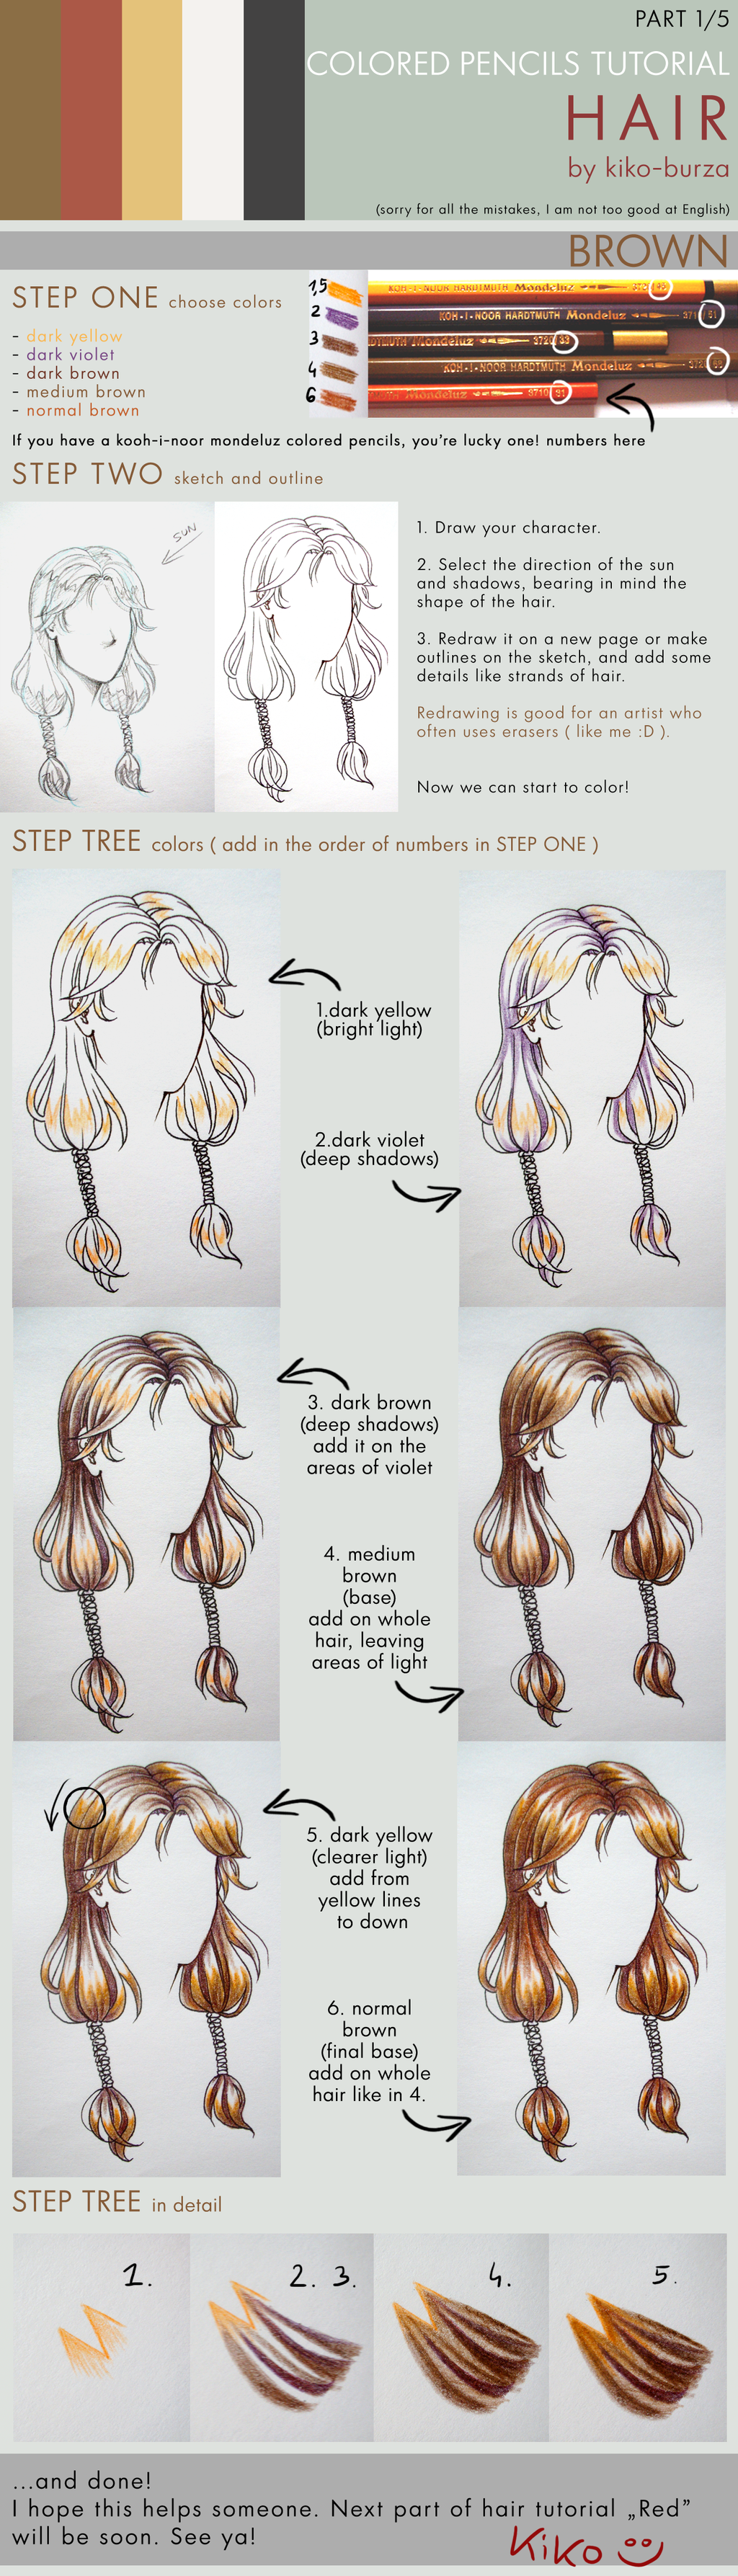 Colored pencils tutorial HAIR part 1 BROWN by kikoburza on DeviantArt